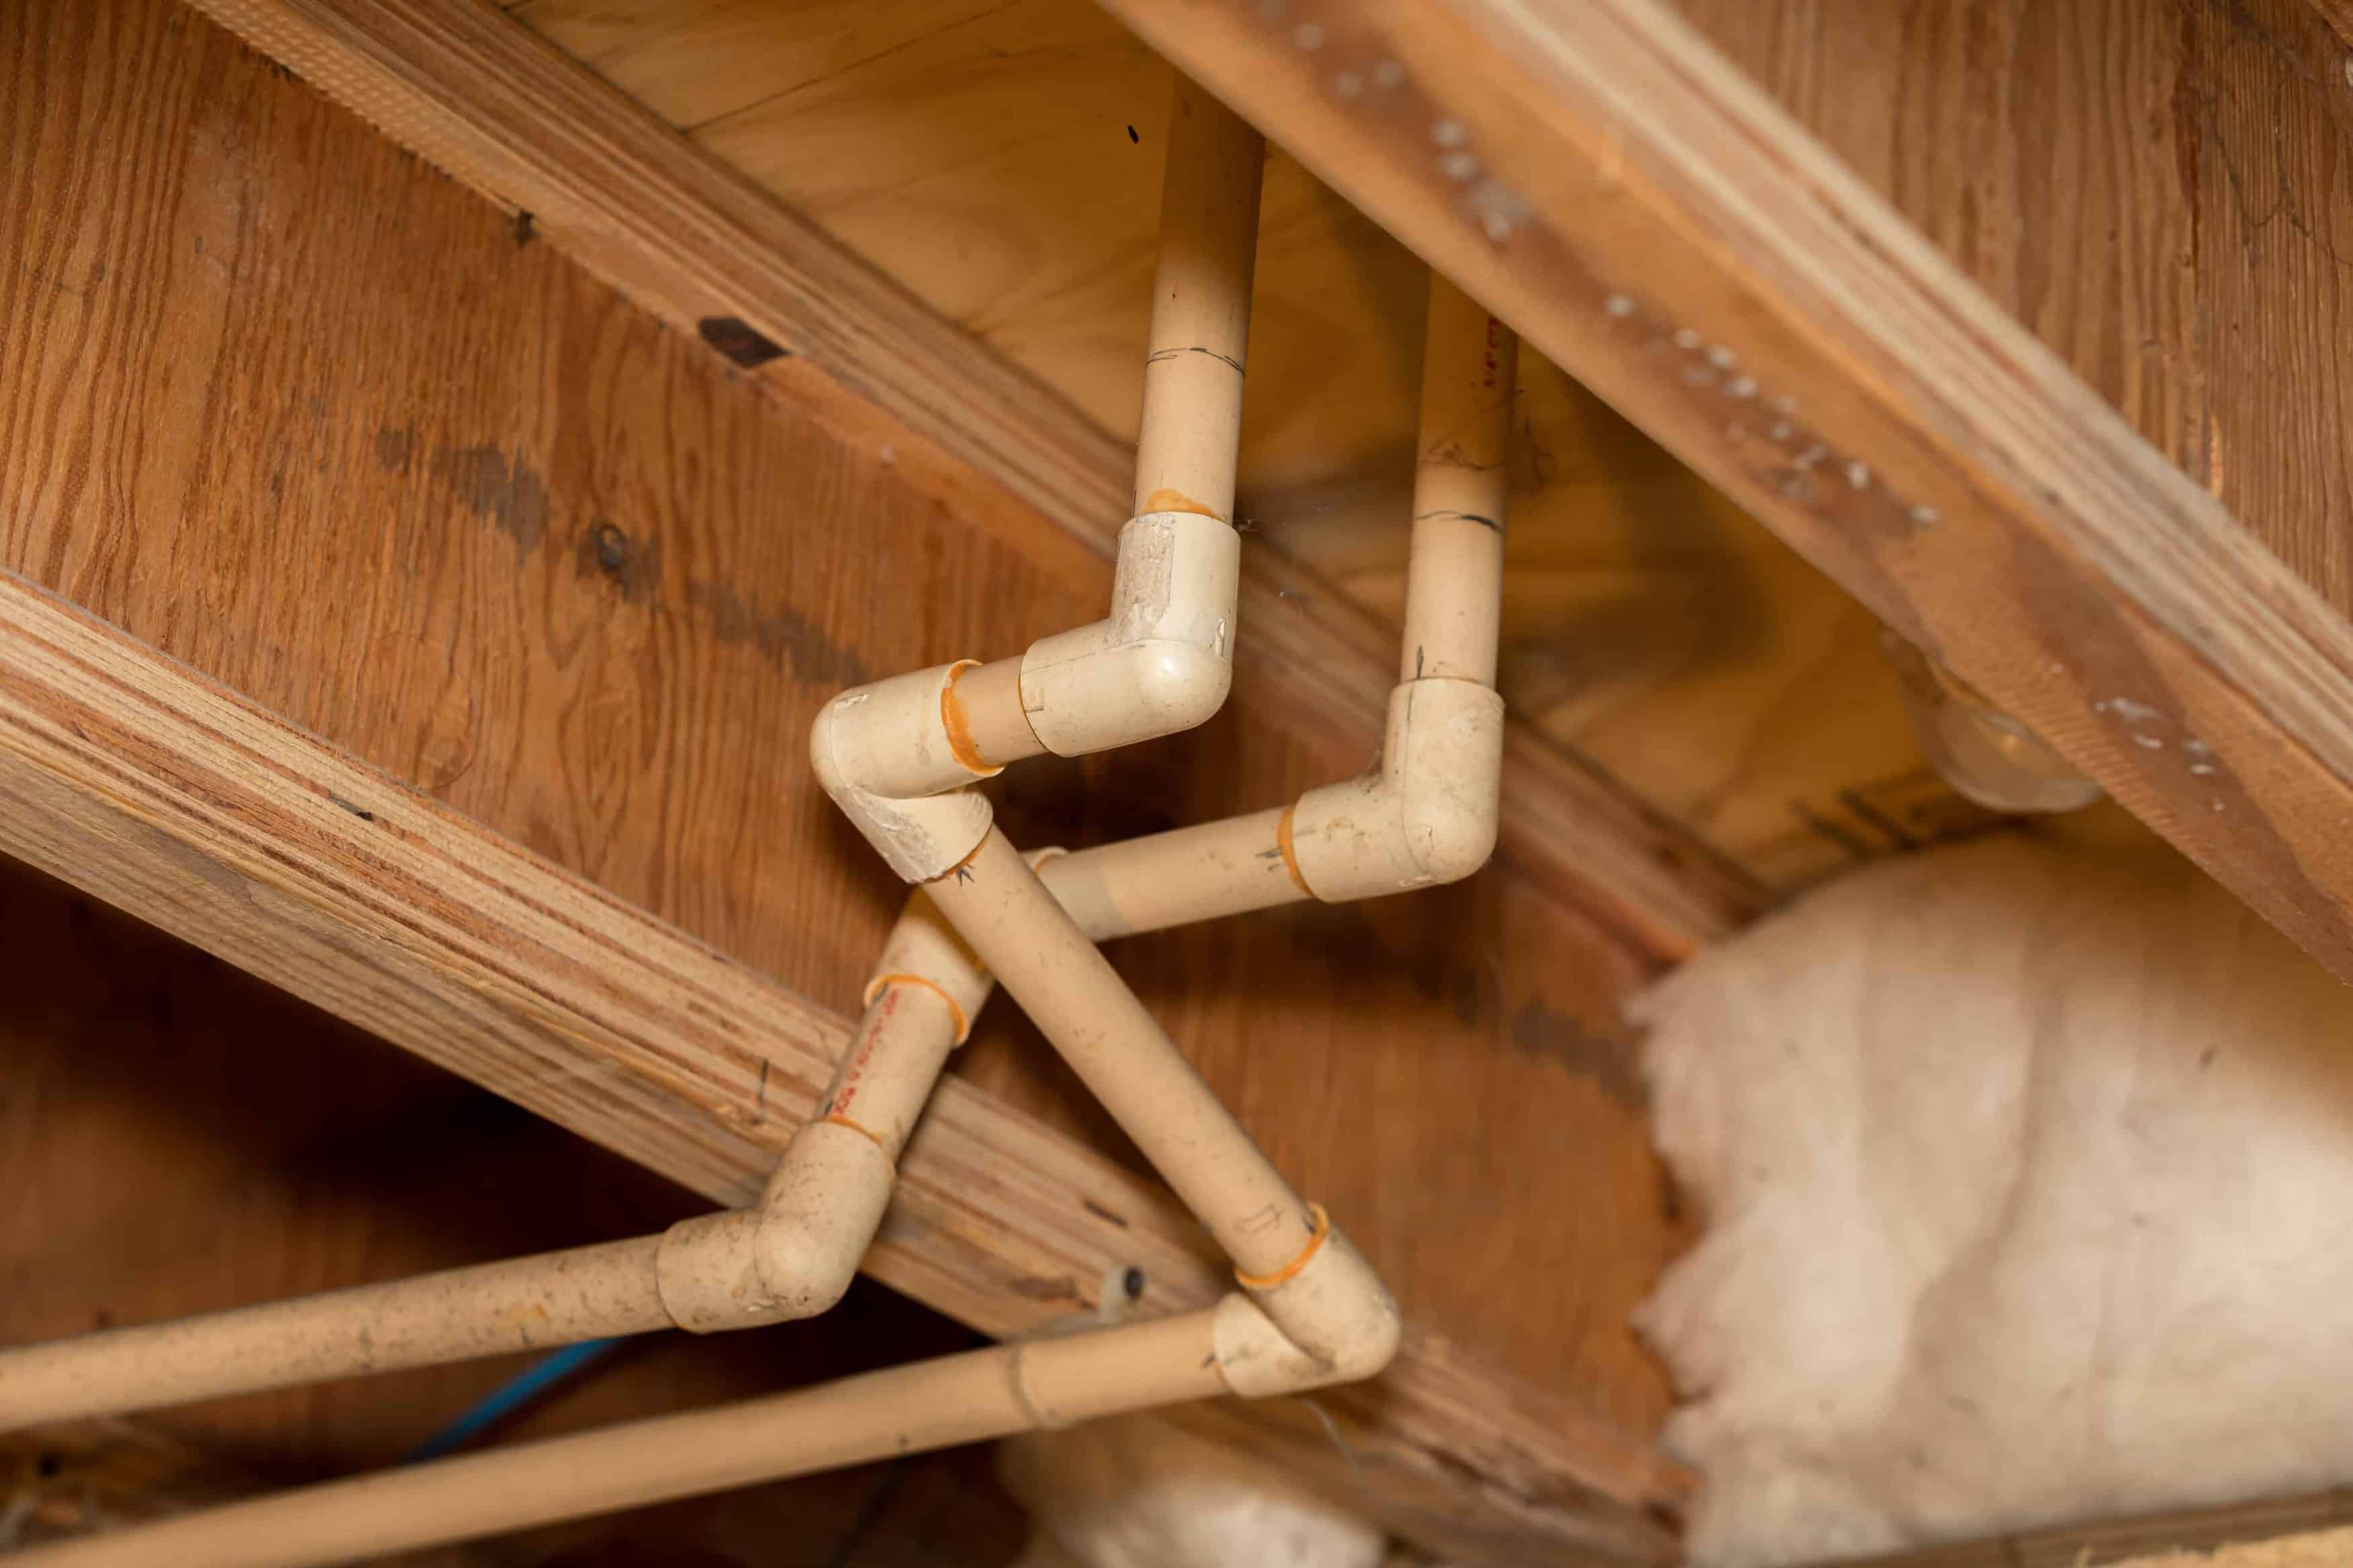 How to prevent bursting pipes during winter